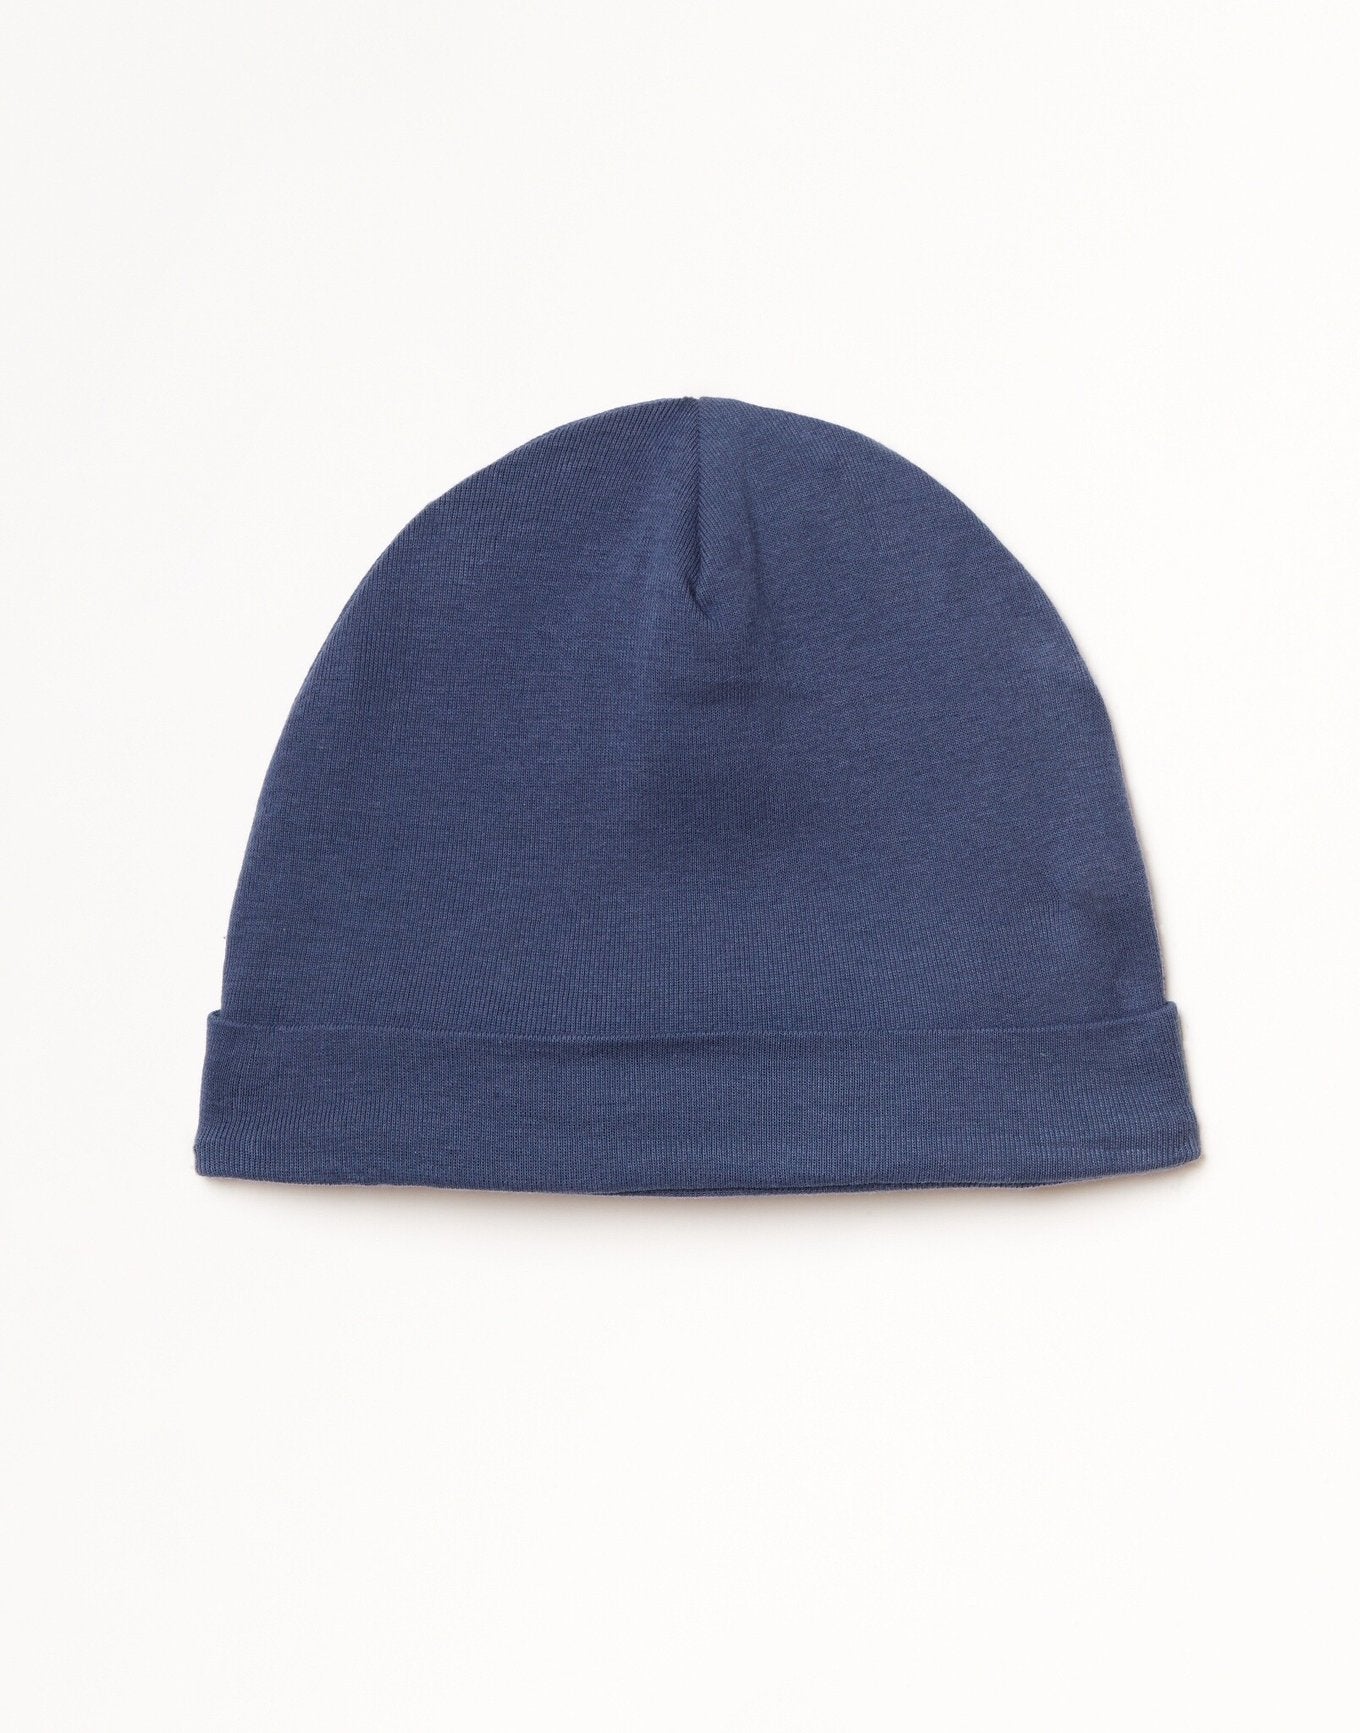 Outlines Kids Royal in color Crown Blue and shape cap hat & beanie